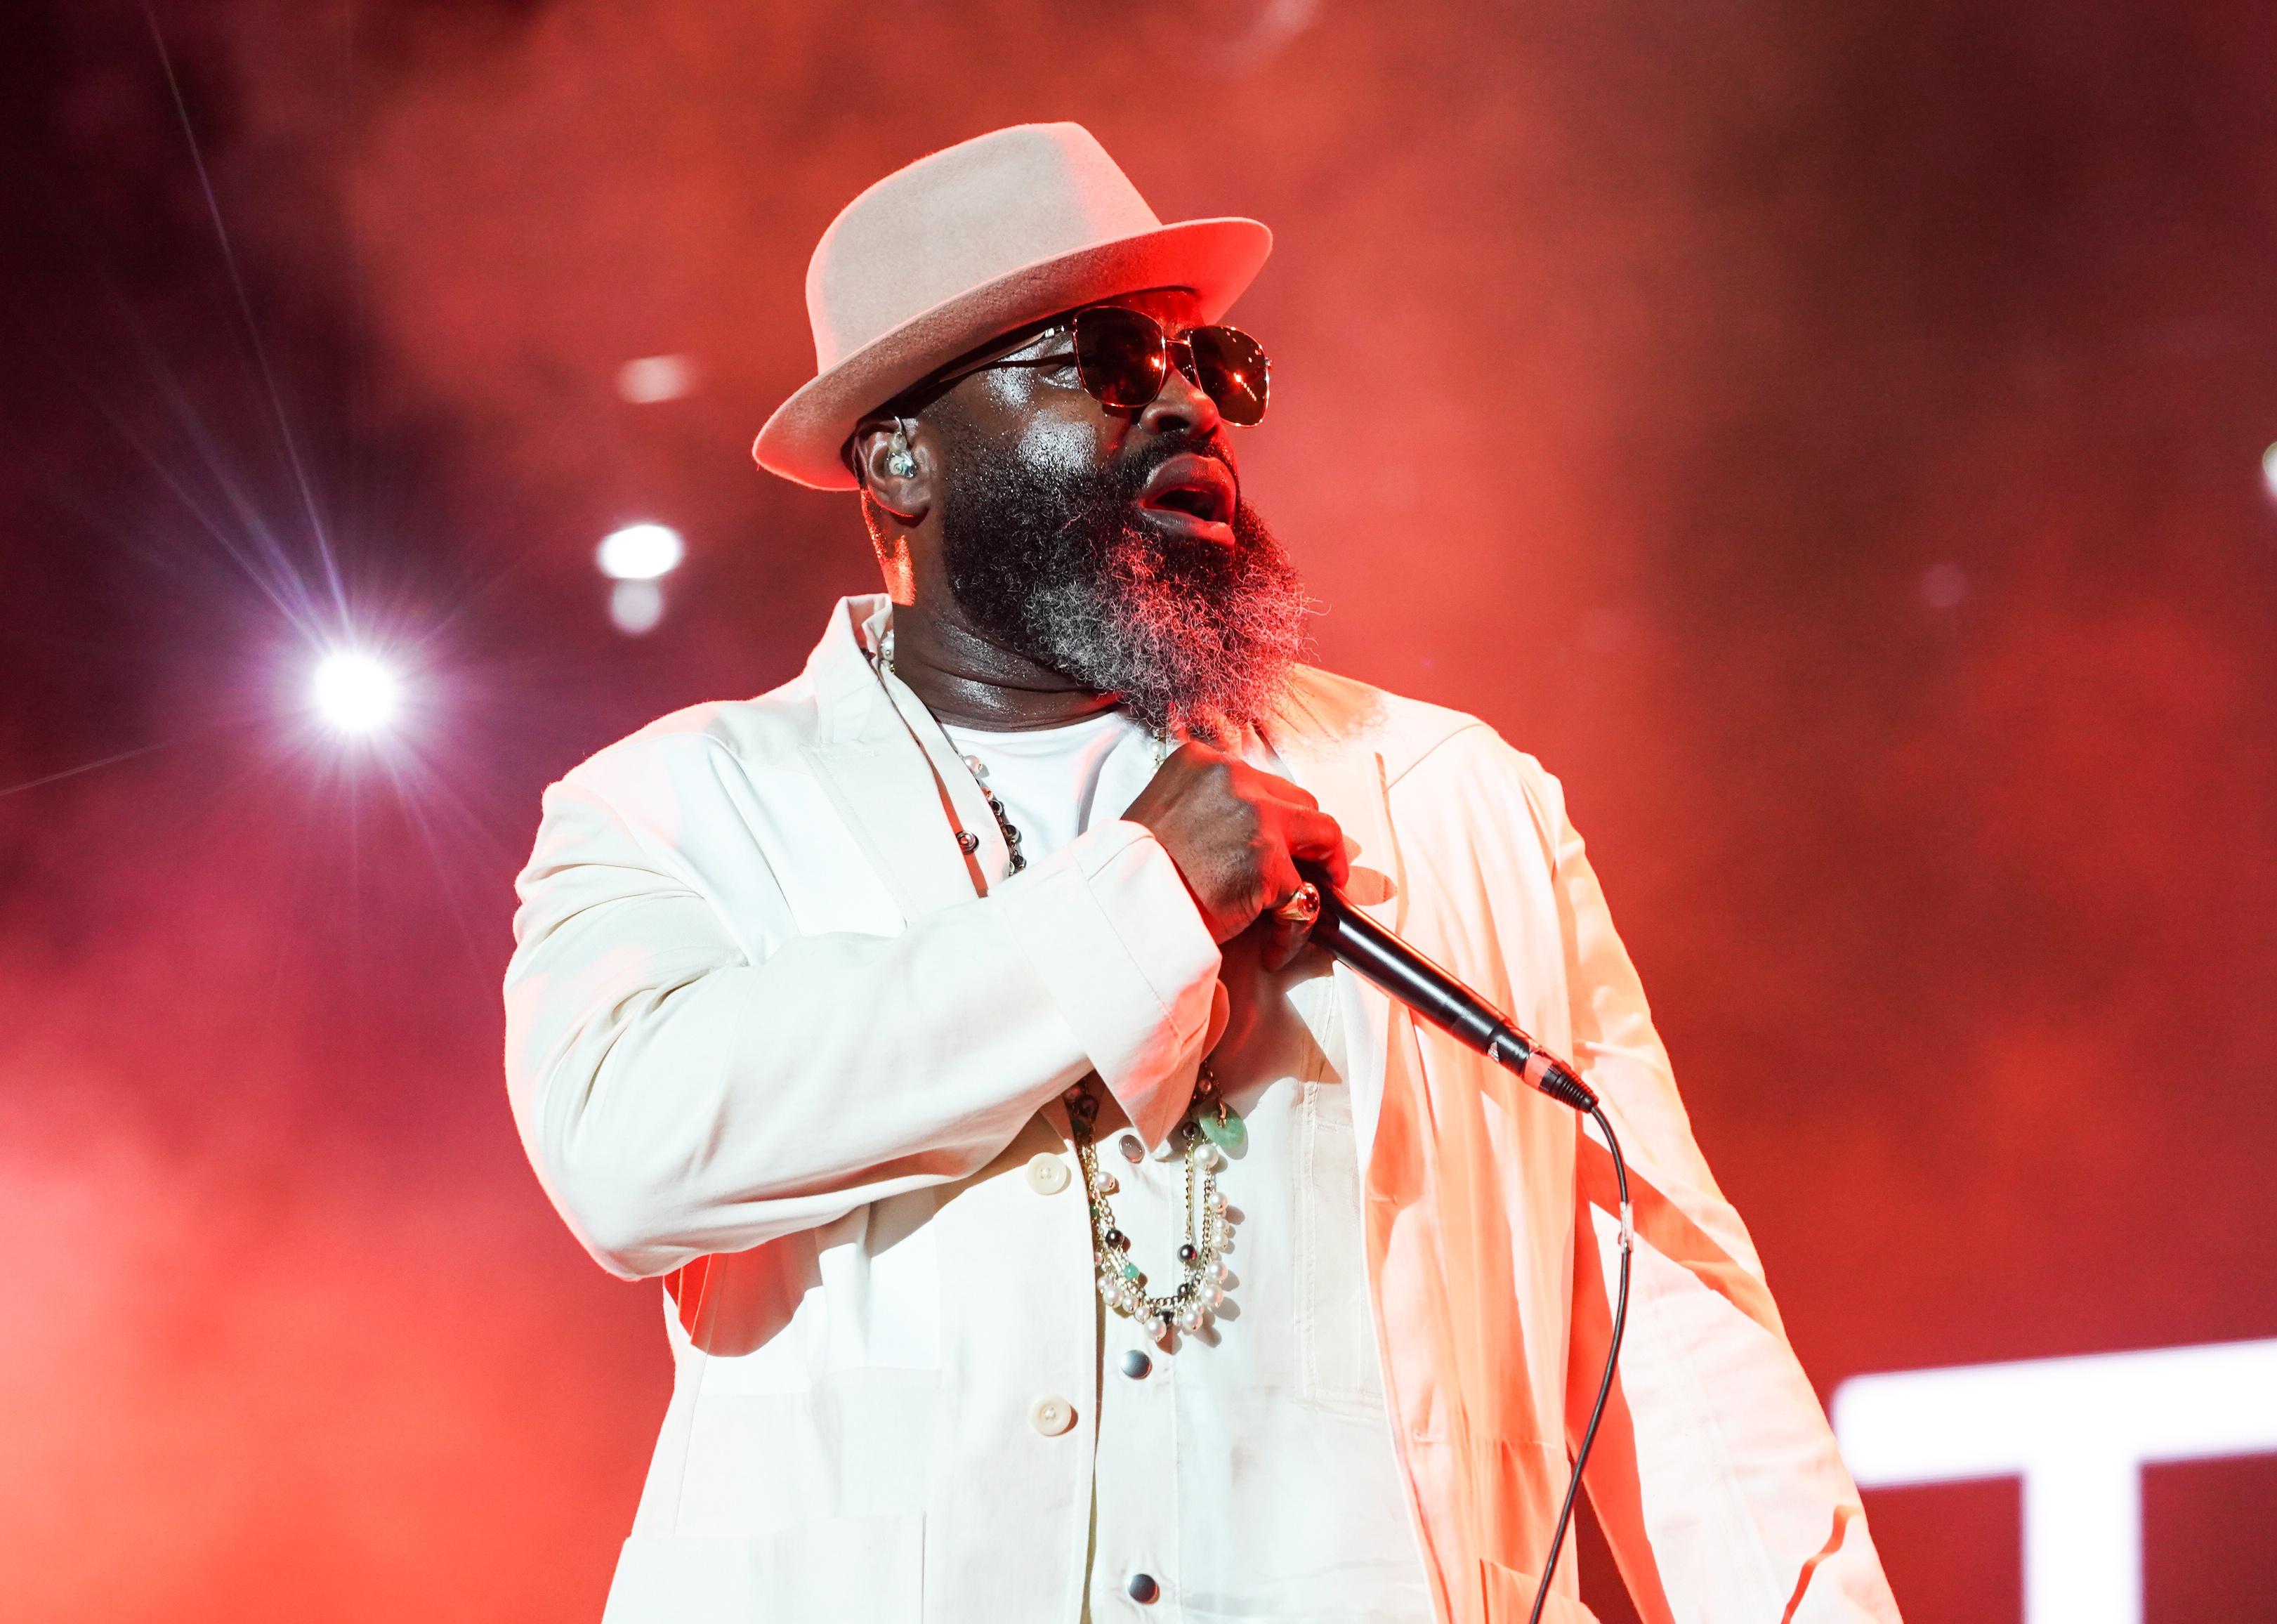 Black Thought performs in a white suit.